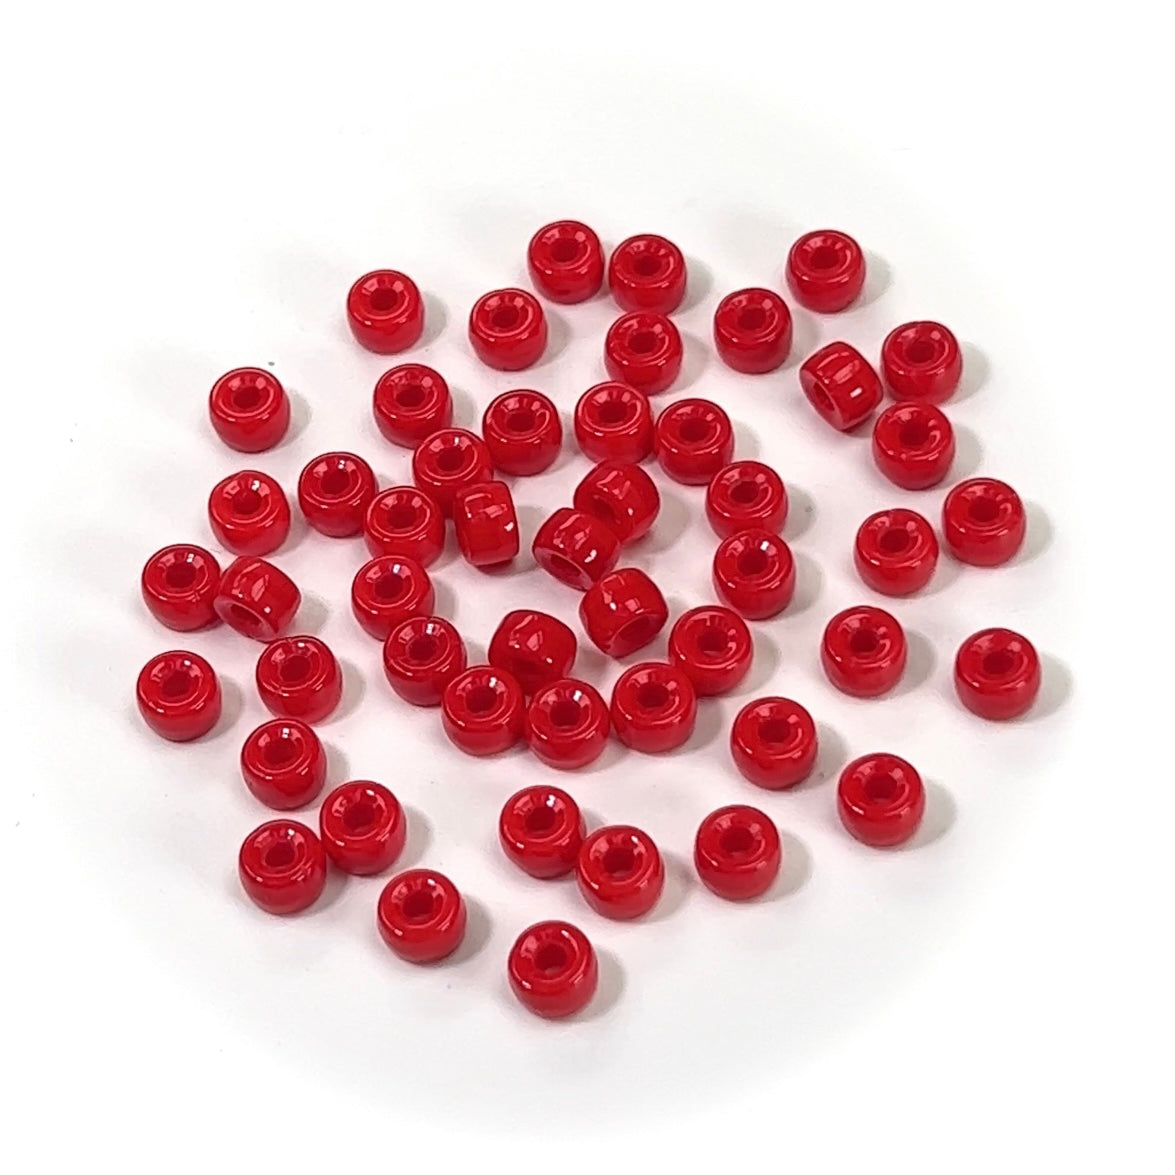 Czech Glass Druk Large Hole Beads in size 6mm, Red Coral Opaque color, 50pcs, J087